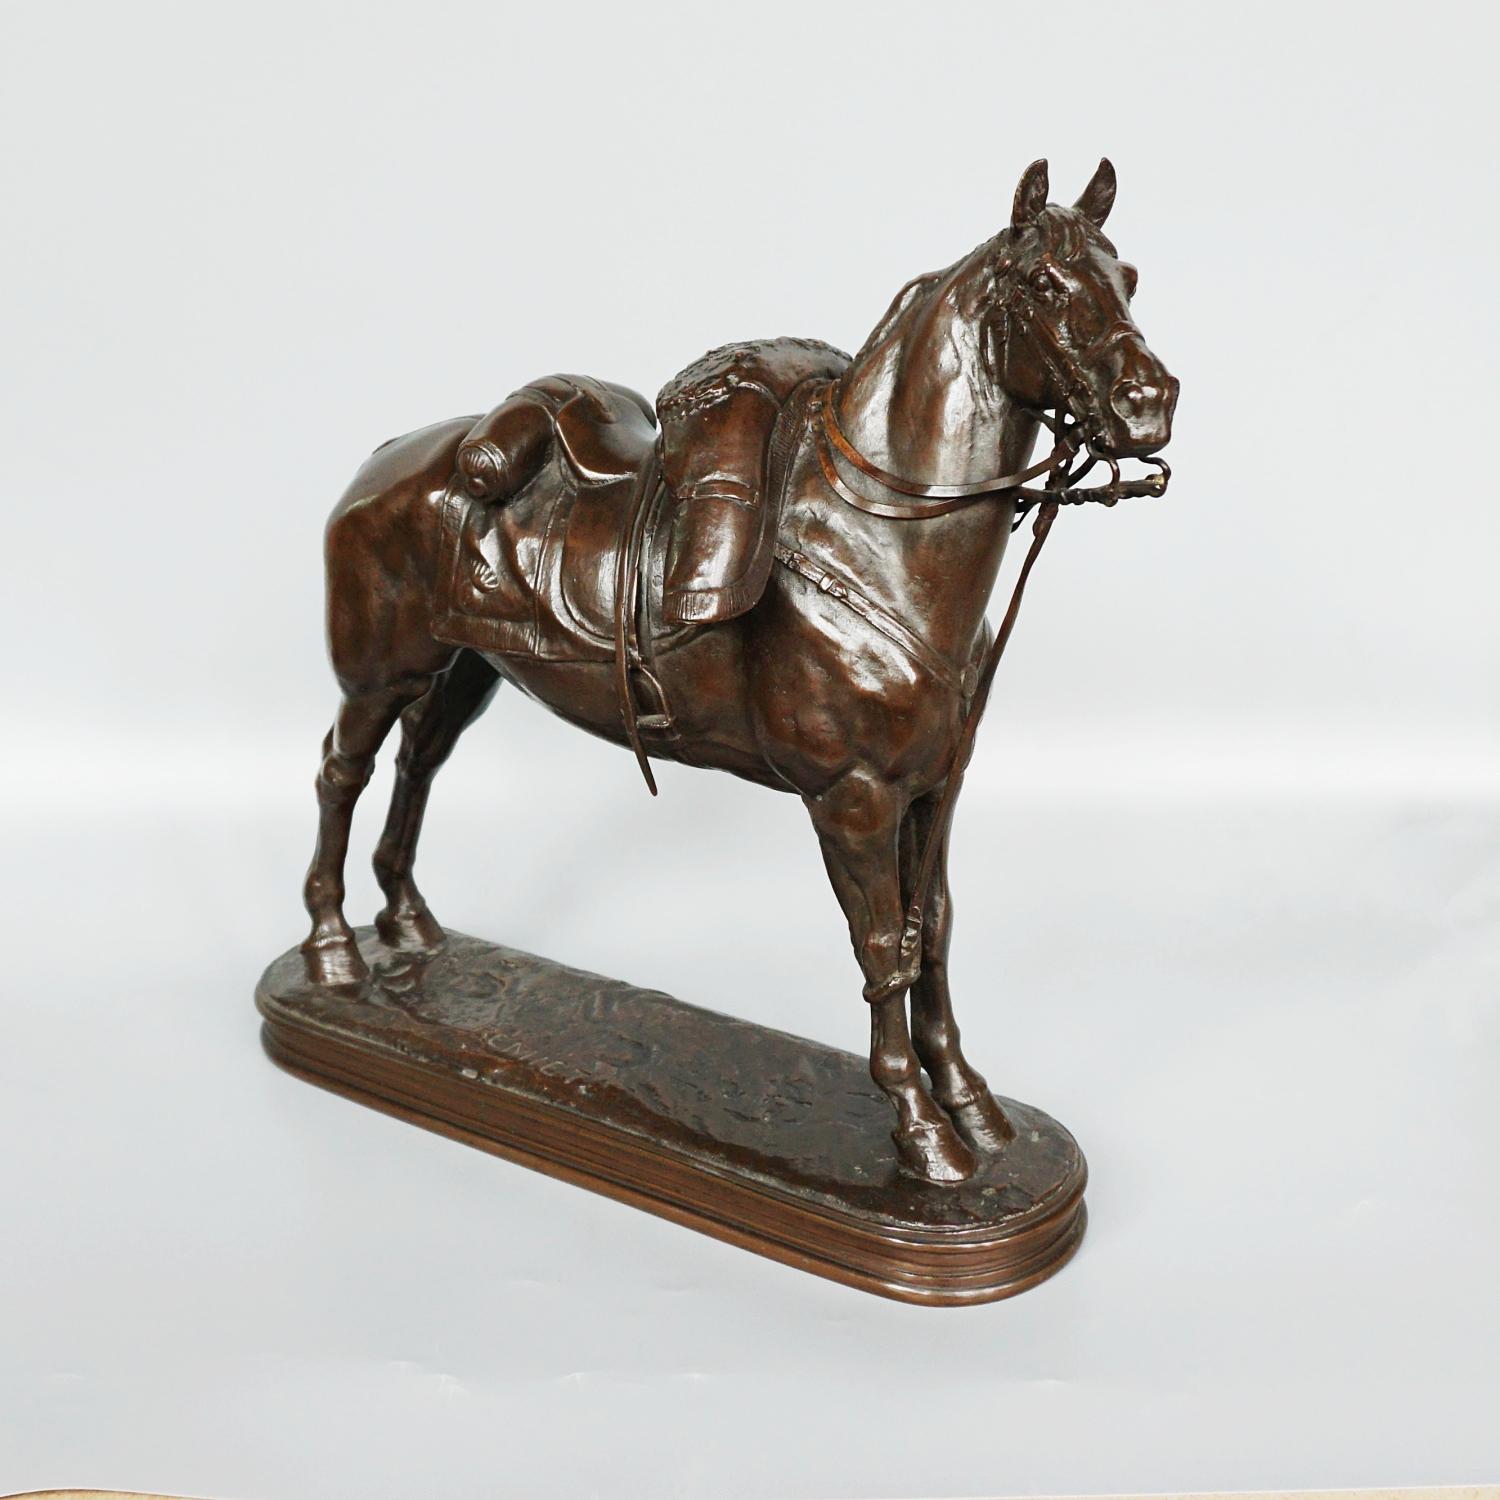 A mid 19th century bronze sculpture of a tethered military horse by Emmanuel Fremiet (1824-1920). Excellent rich brown patination. The saddle cloth is marked with a cipher of a flame above a sphere and is possibly from the regiment of engineers.